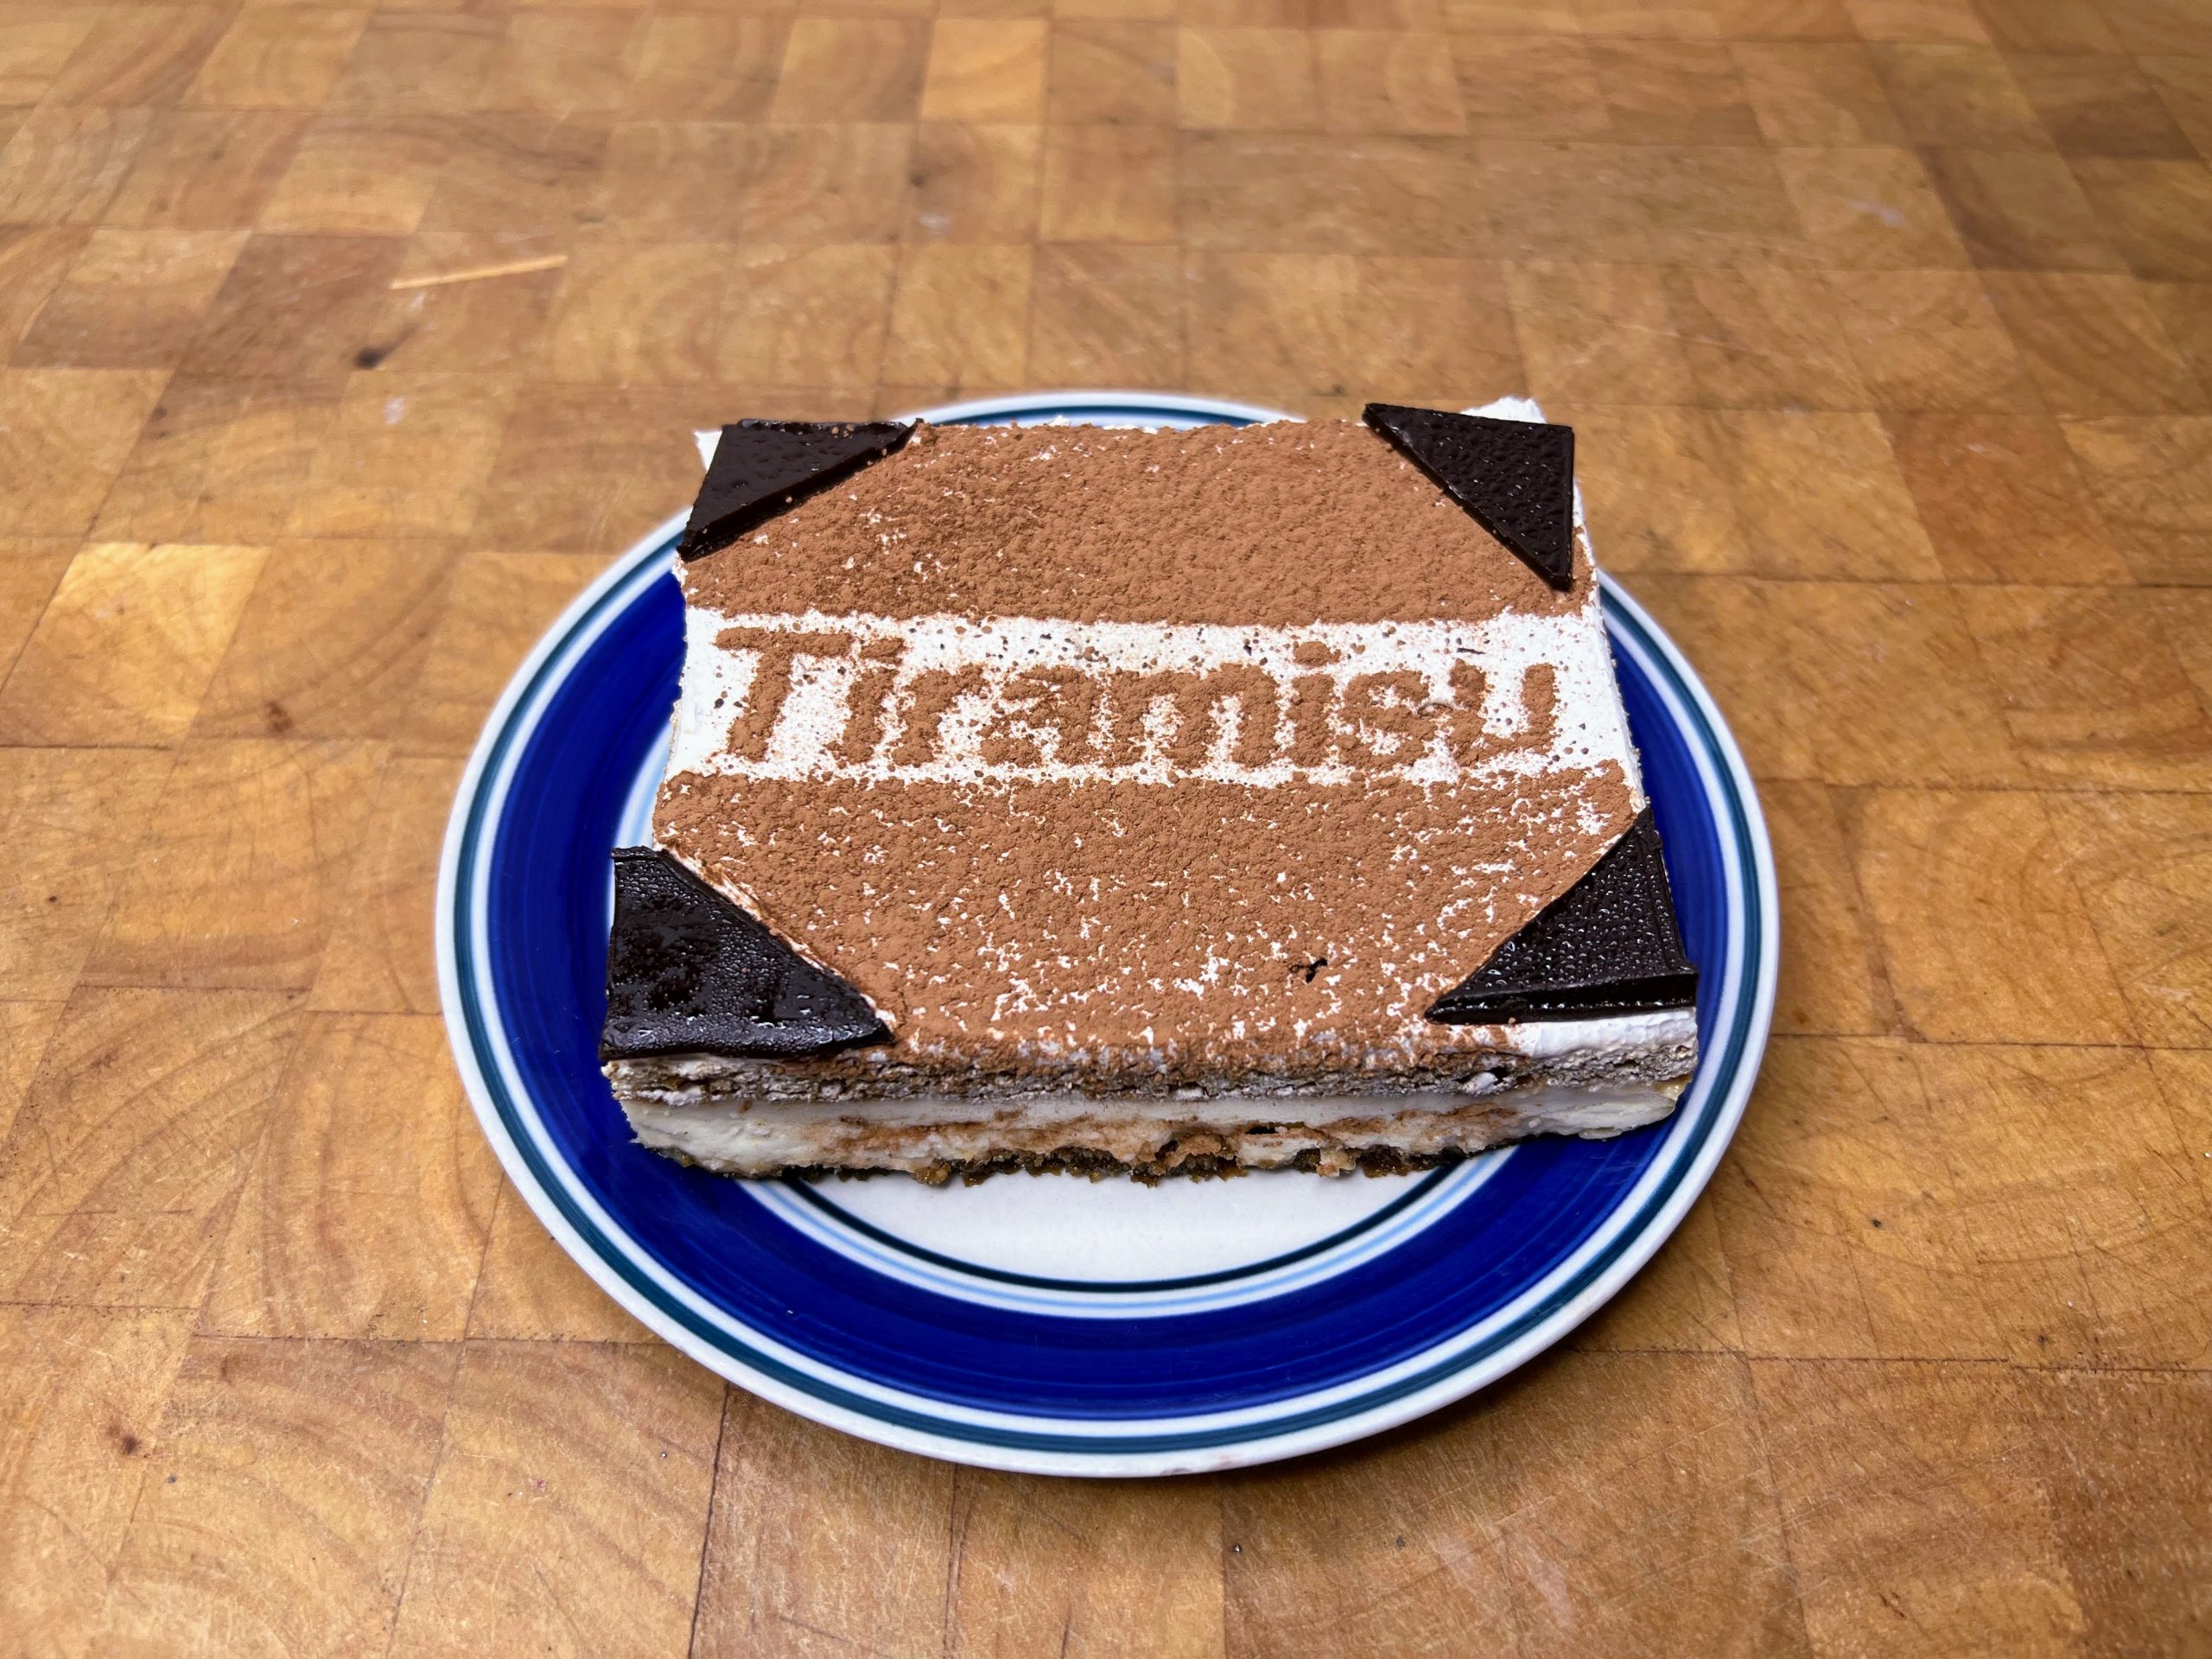 tiramisu on a blue plate on a wooden table